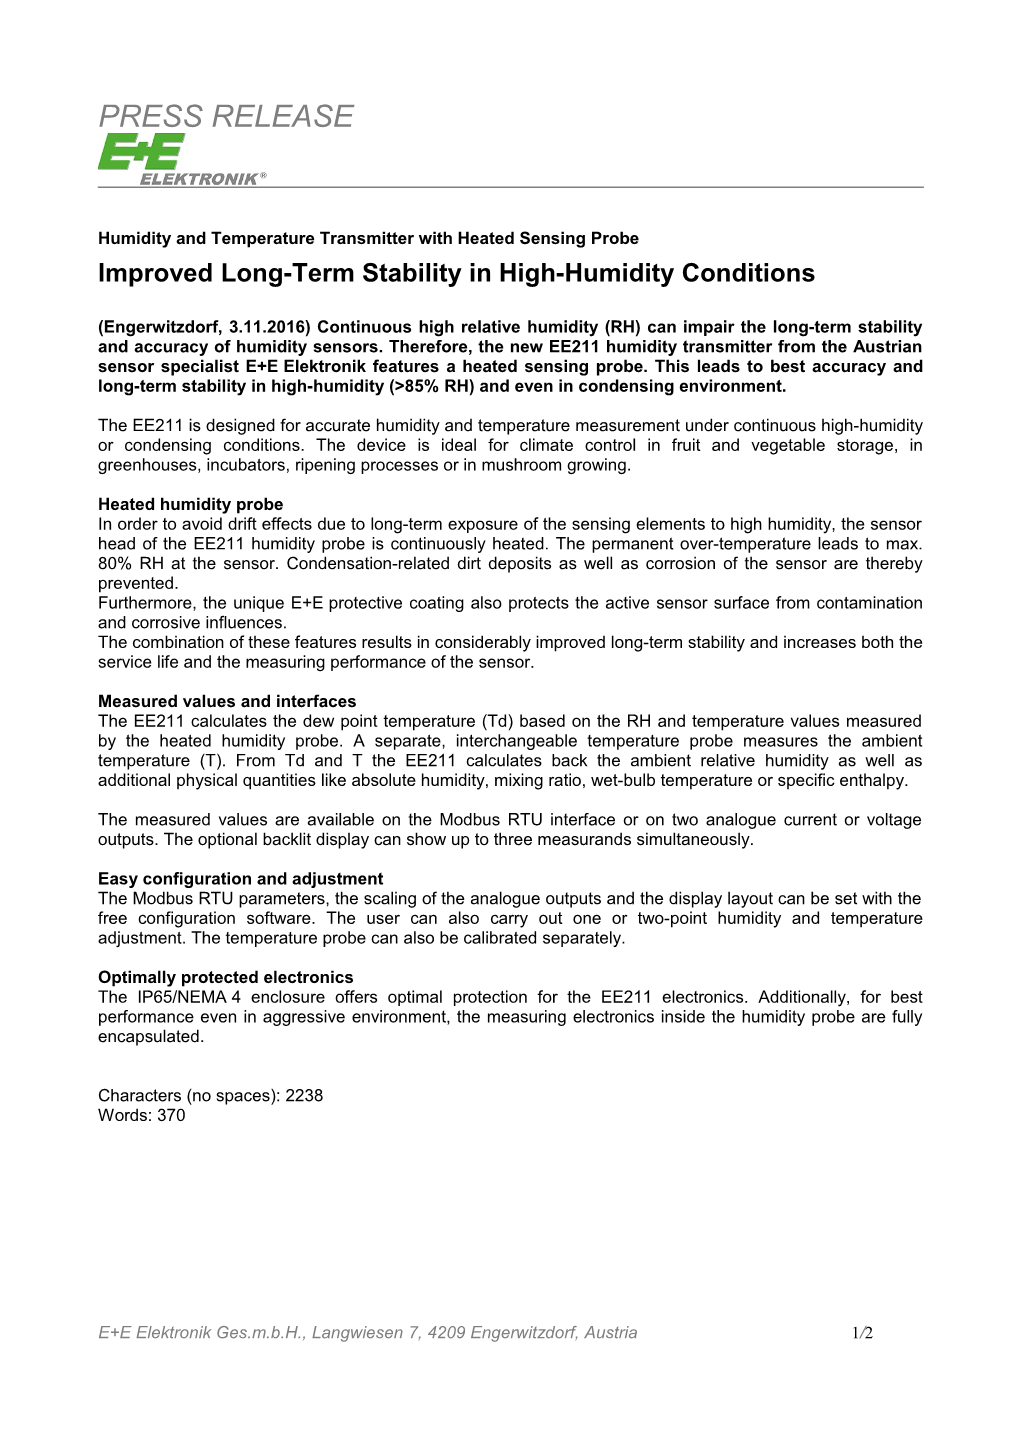 Improved Long-Term Stability in High-Humidity Conditions